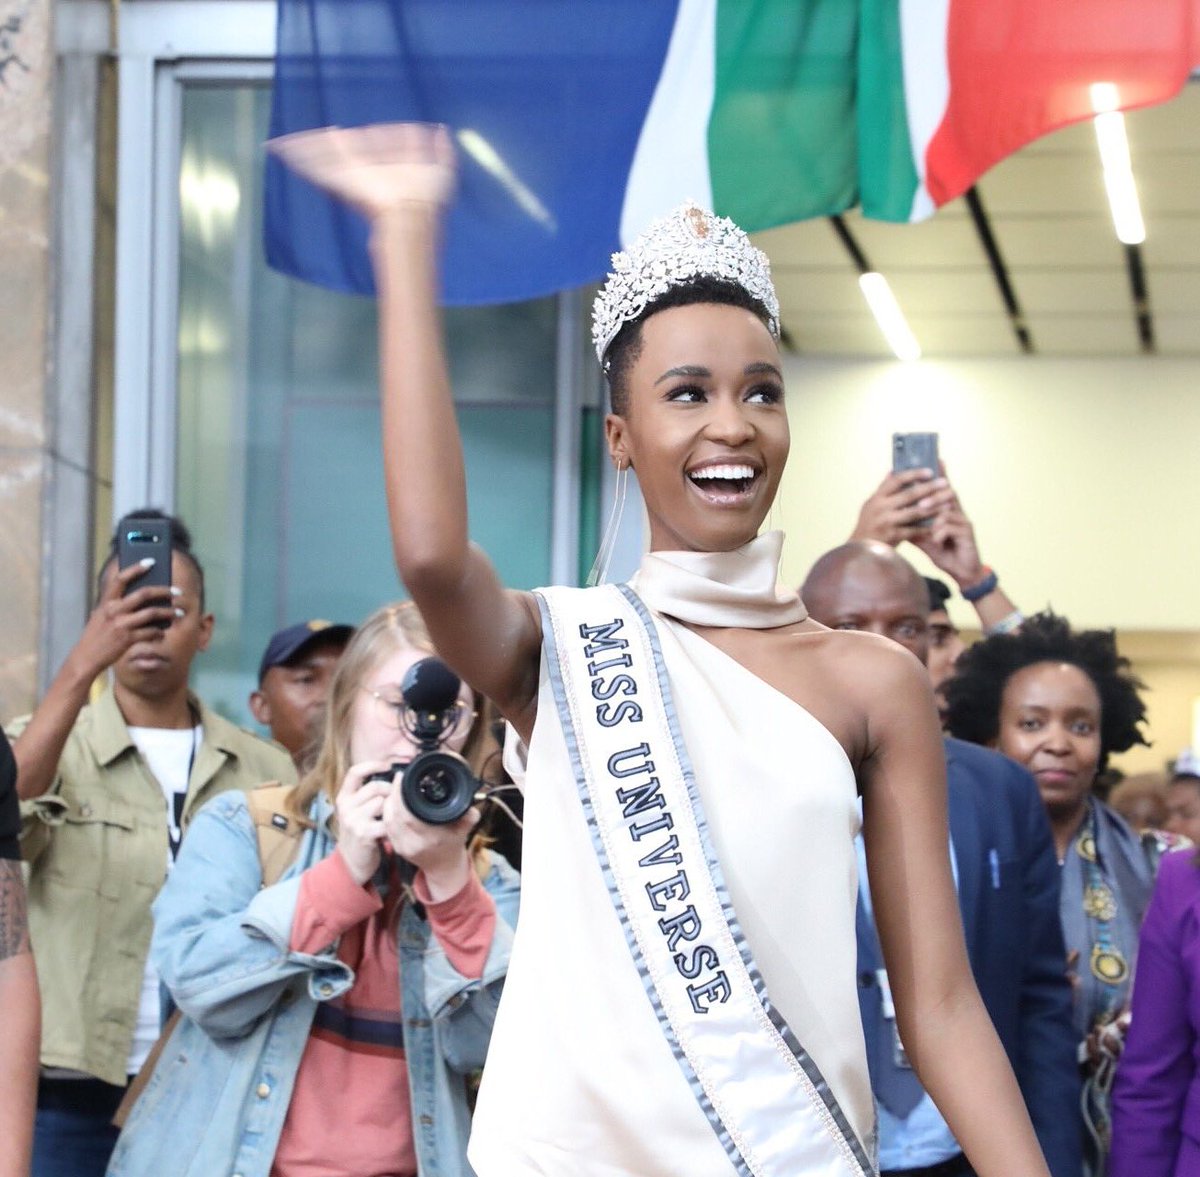 Welcome home Zozi 💃🏿 #ZoziComesHome #MissUniverse2019 #MissUniverse #SouthAfrican #TakeUpSpaceAndLead